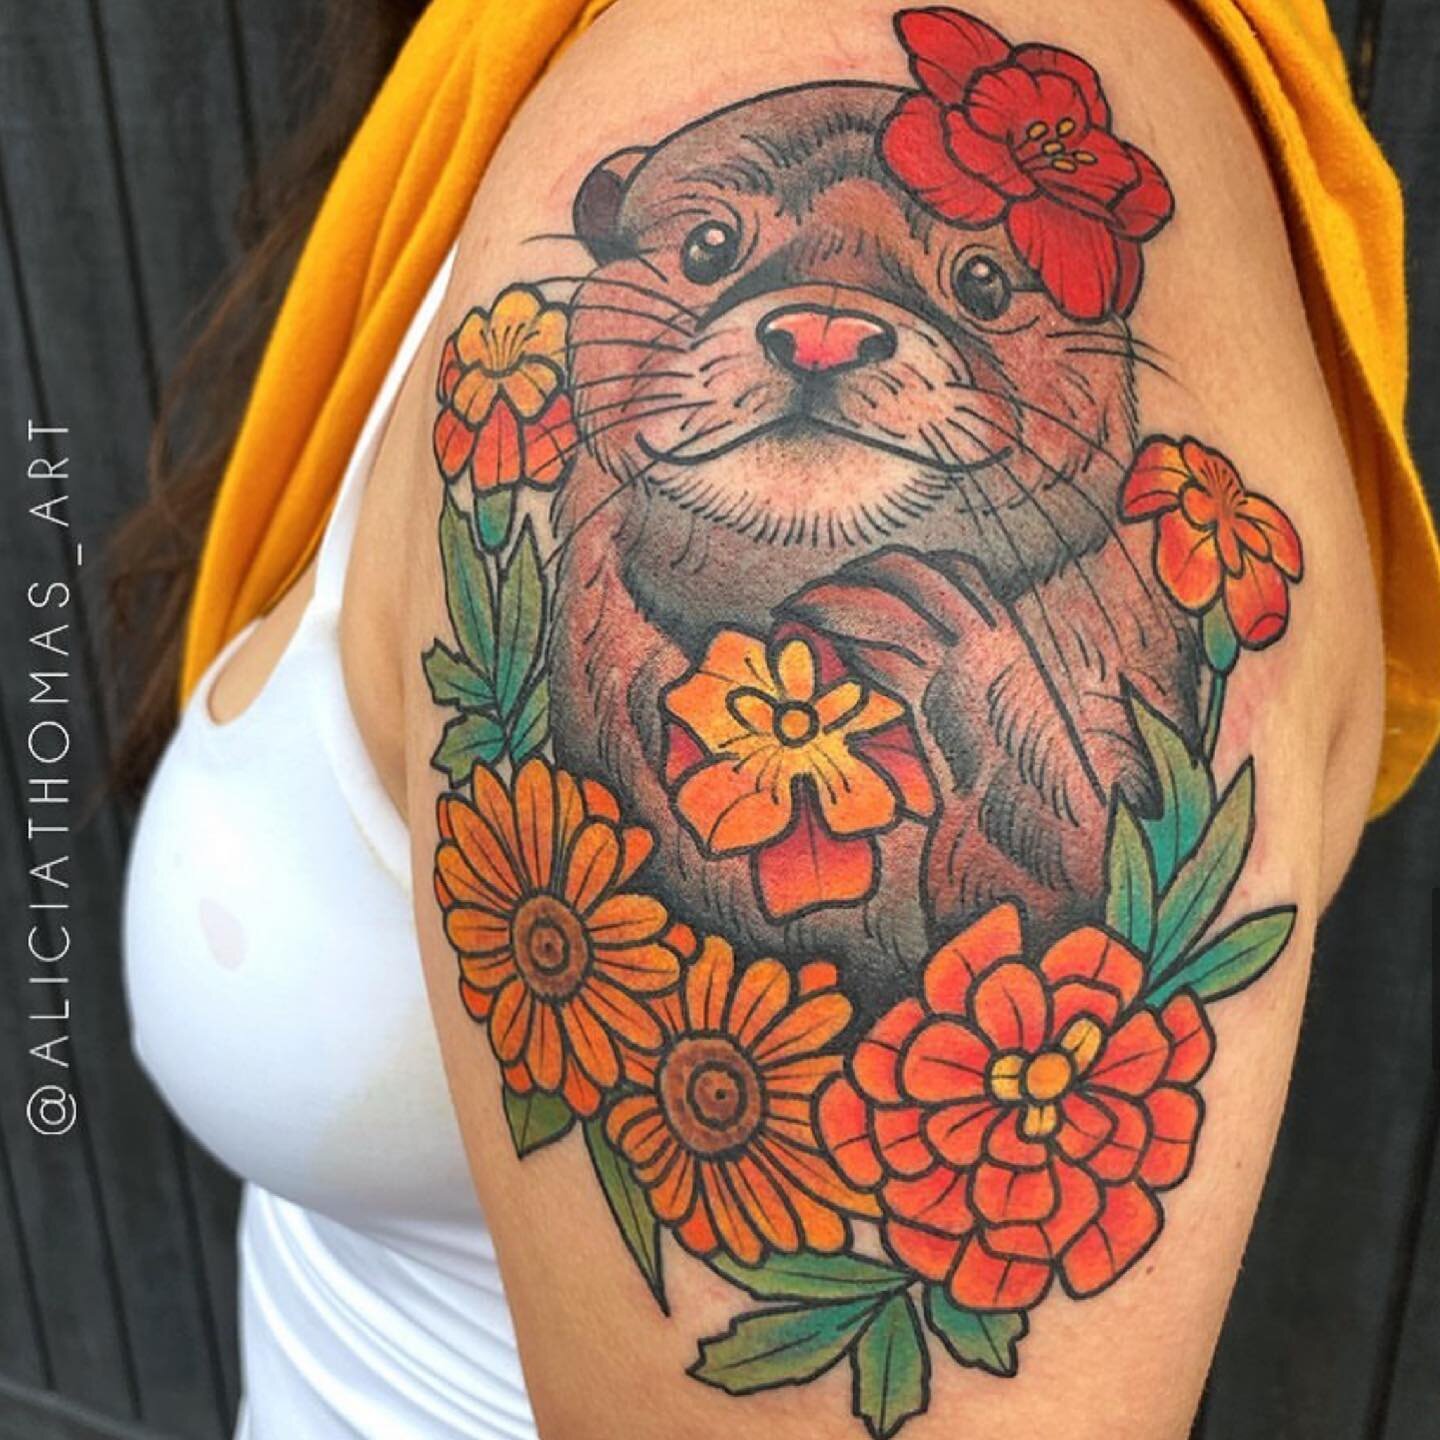 An otter adorned with her marigolds recently made by @aliciathomas_art 
*
For all future bookings reach out to her via email.
*
Aliciathomas_art@yahoo.com
*
#aliciathomas #aliciathomas_art #ladytattooers #ladiesladiesartshow #supportgoodtattooing #bo